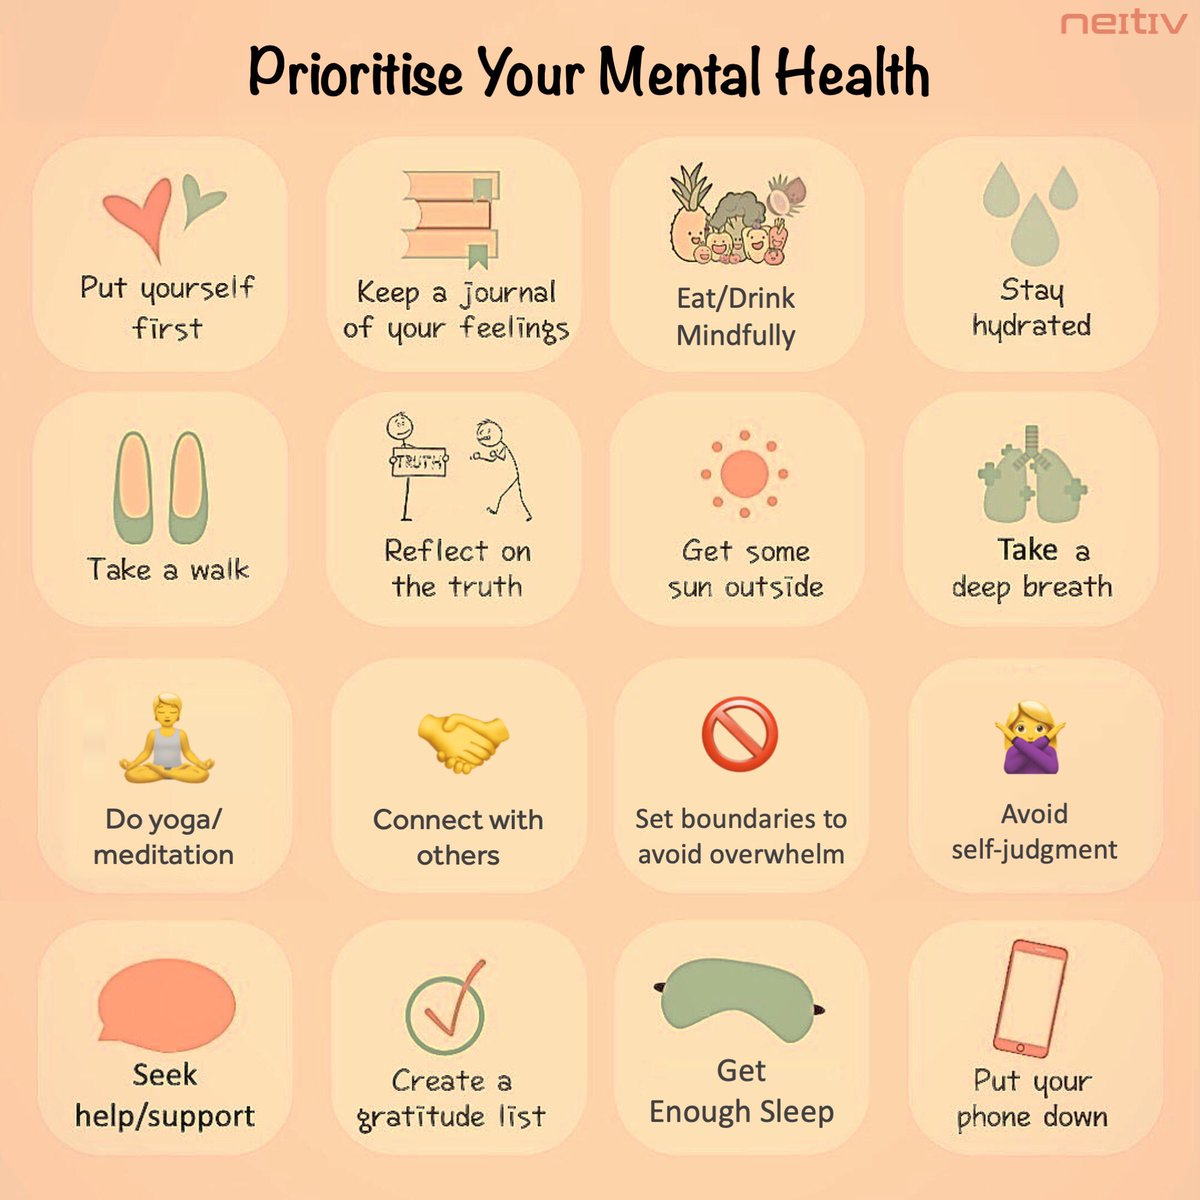 During #StressAwarenessMonth 😣, aim to practice three of our self-care tips daily. Which ones do you find enjoyable? 💗
.
.
.
#stayhealthy #Neitiv #NeitivUK #healthyliving #mandala #mindfulness #wellness #yoga #goals #lowalcoholbeer #meditation #mentalhealth #challangeyourself